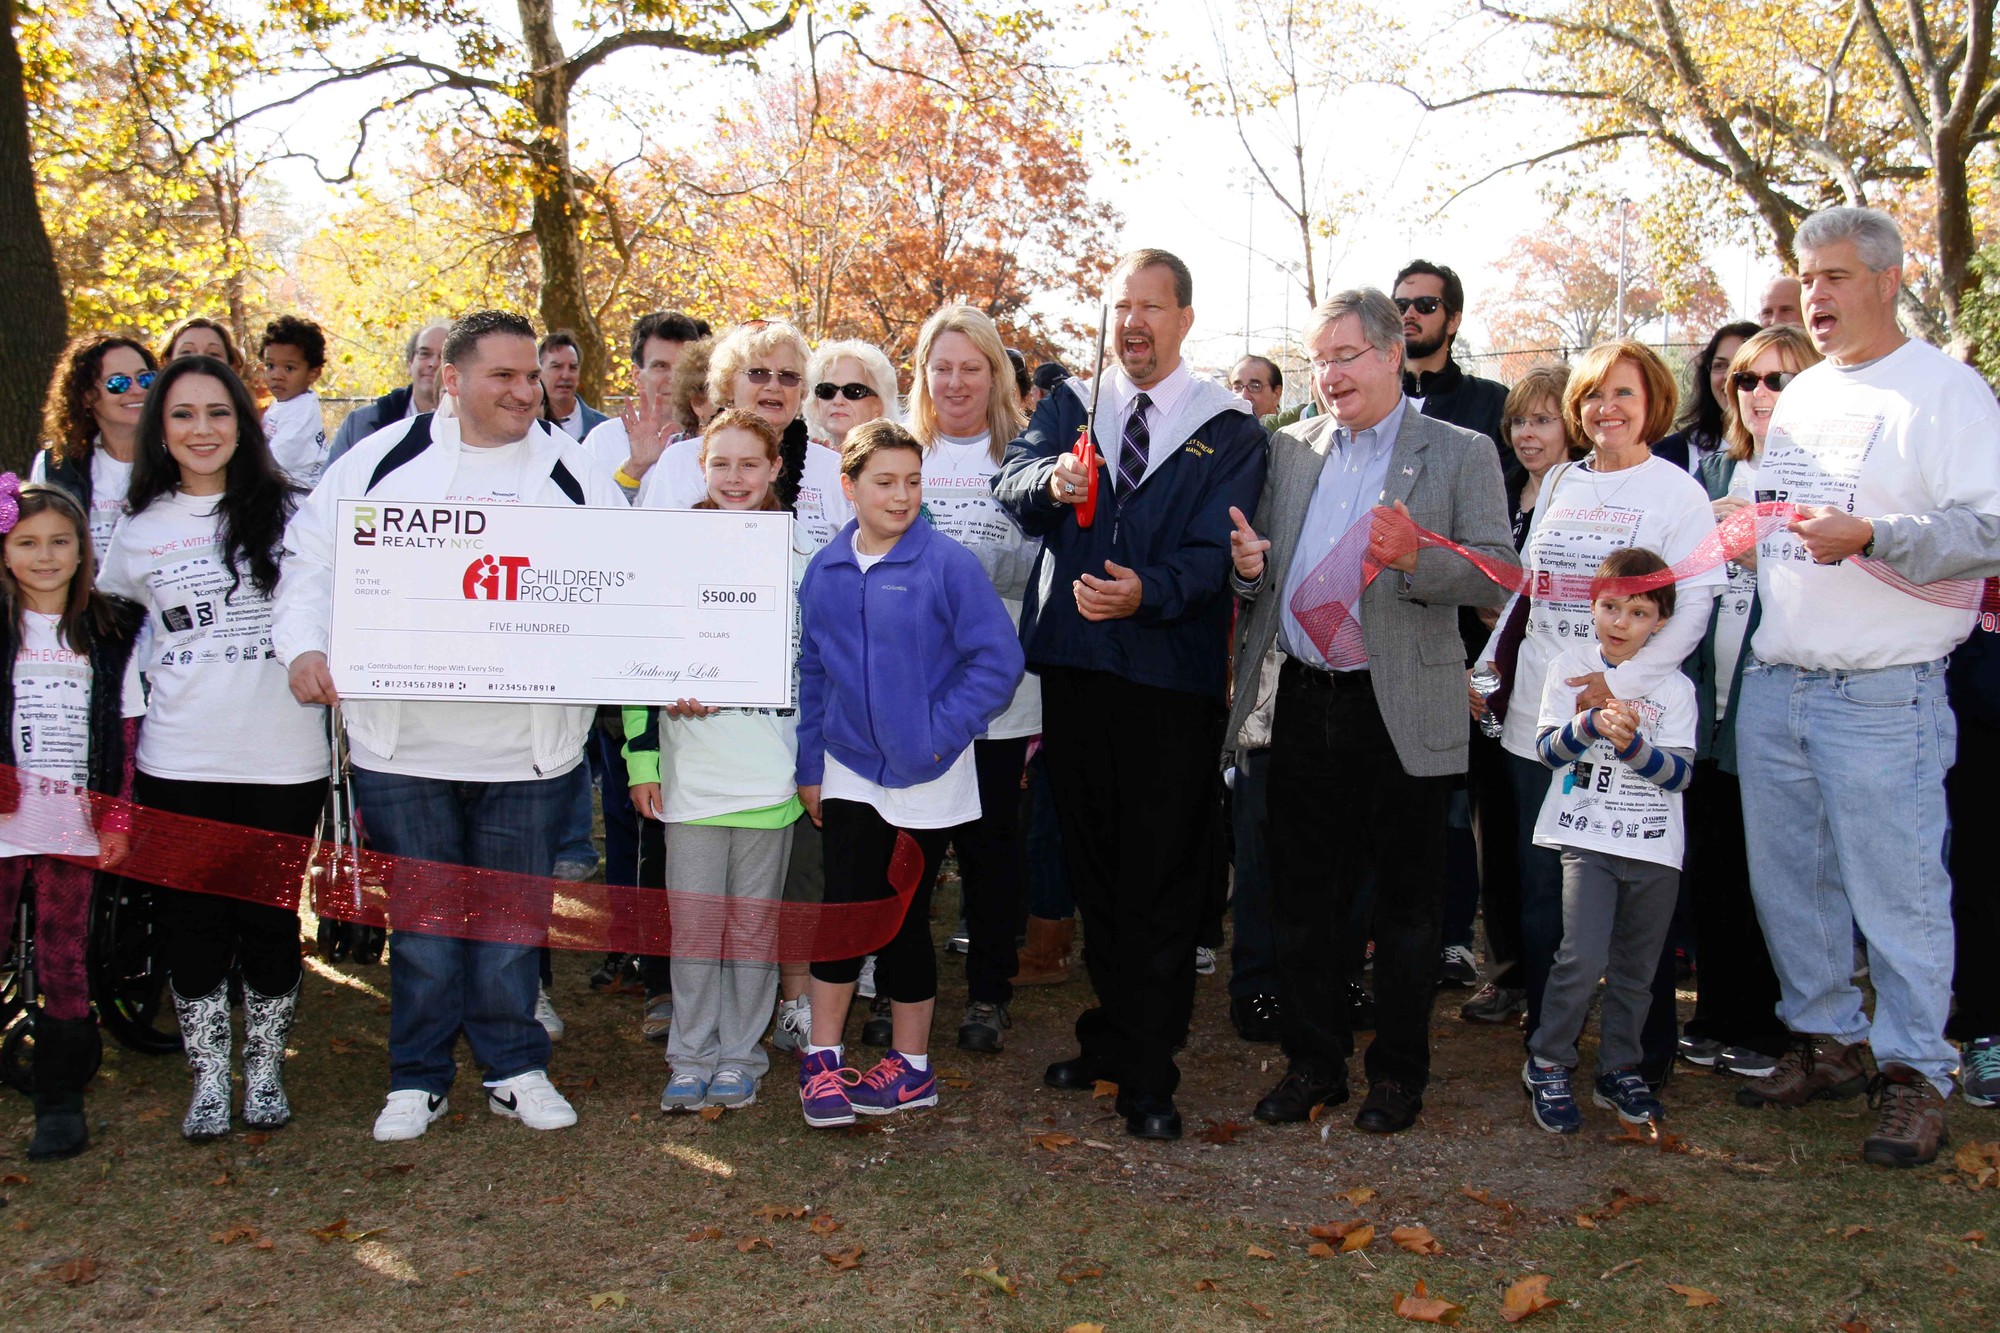 Mayor Ed Fare, along with Village Justice BobBogle, cut the ribbon to kick off the third annual Hope With Every Step fundraiser at Hendrickson Park on Nov. 2.